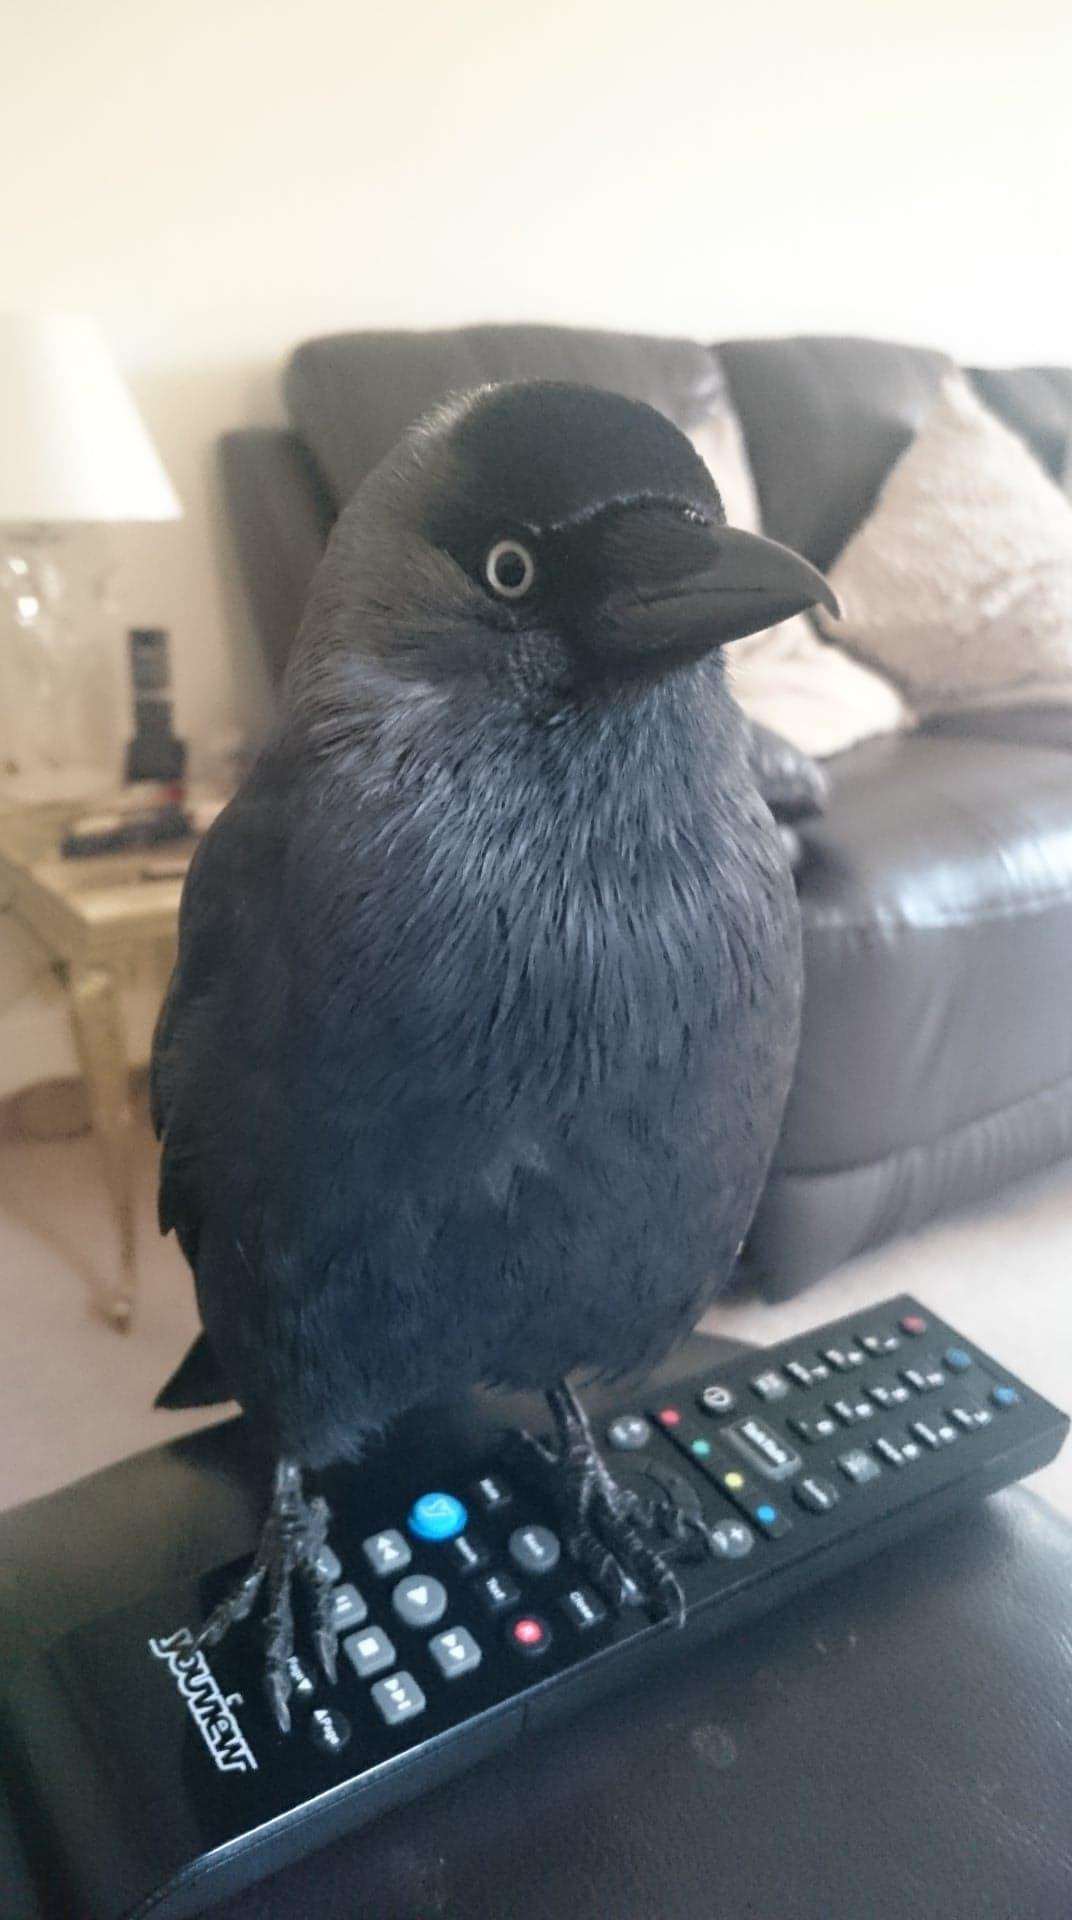 JD the missing jackdaw